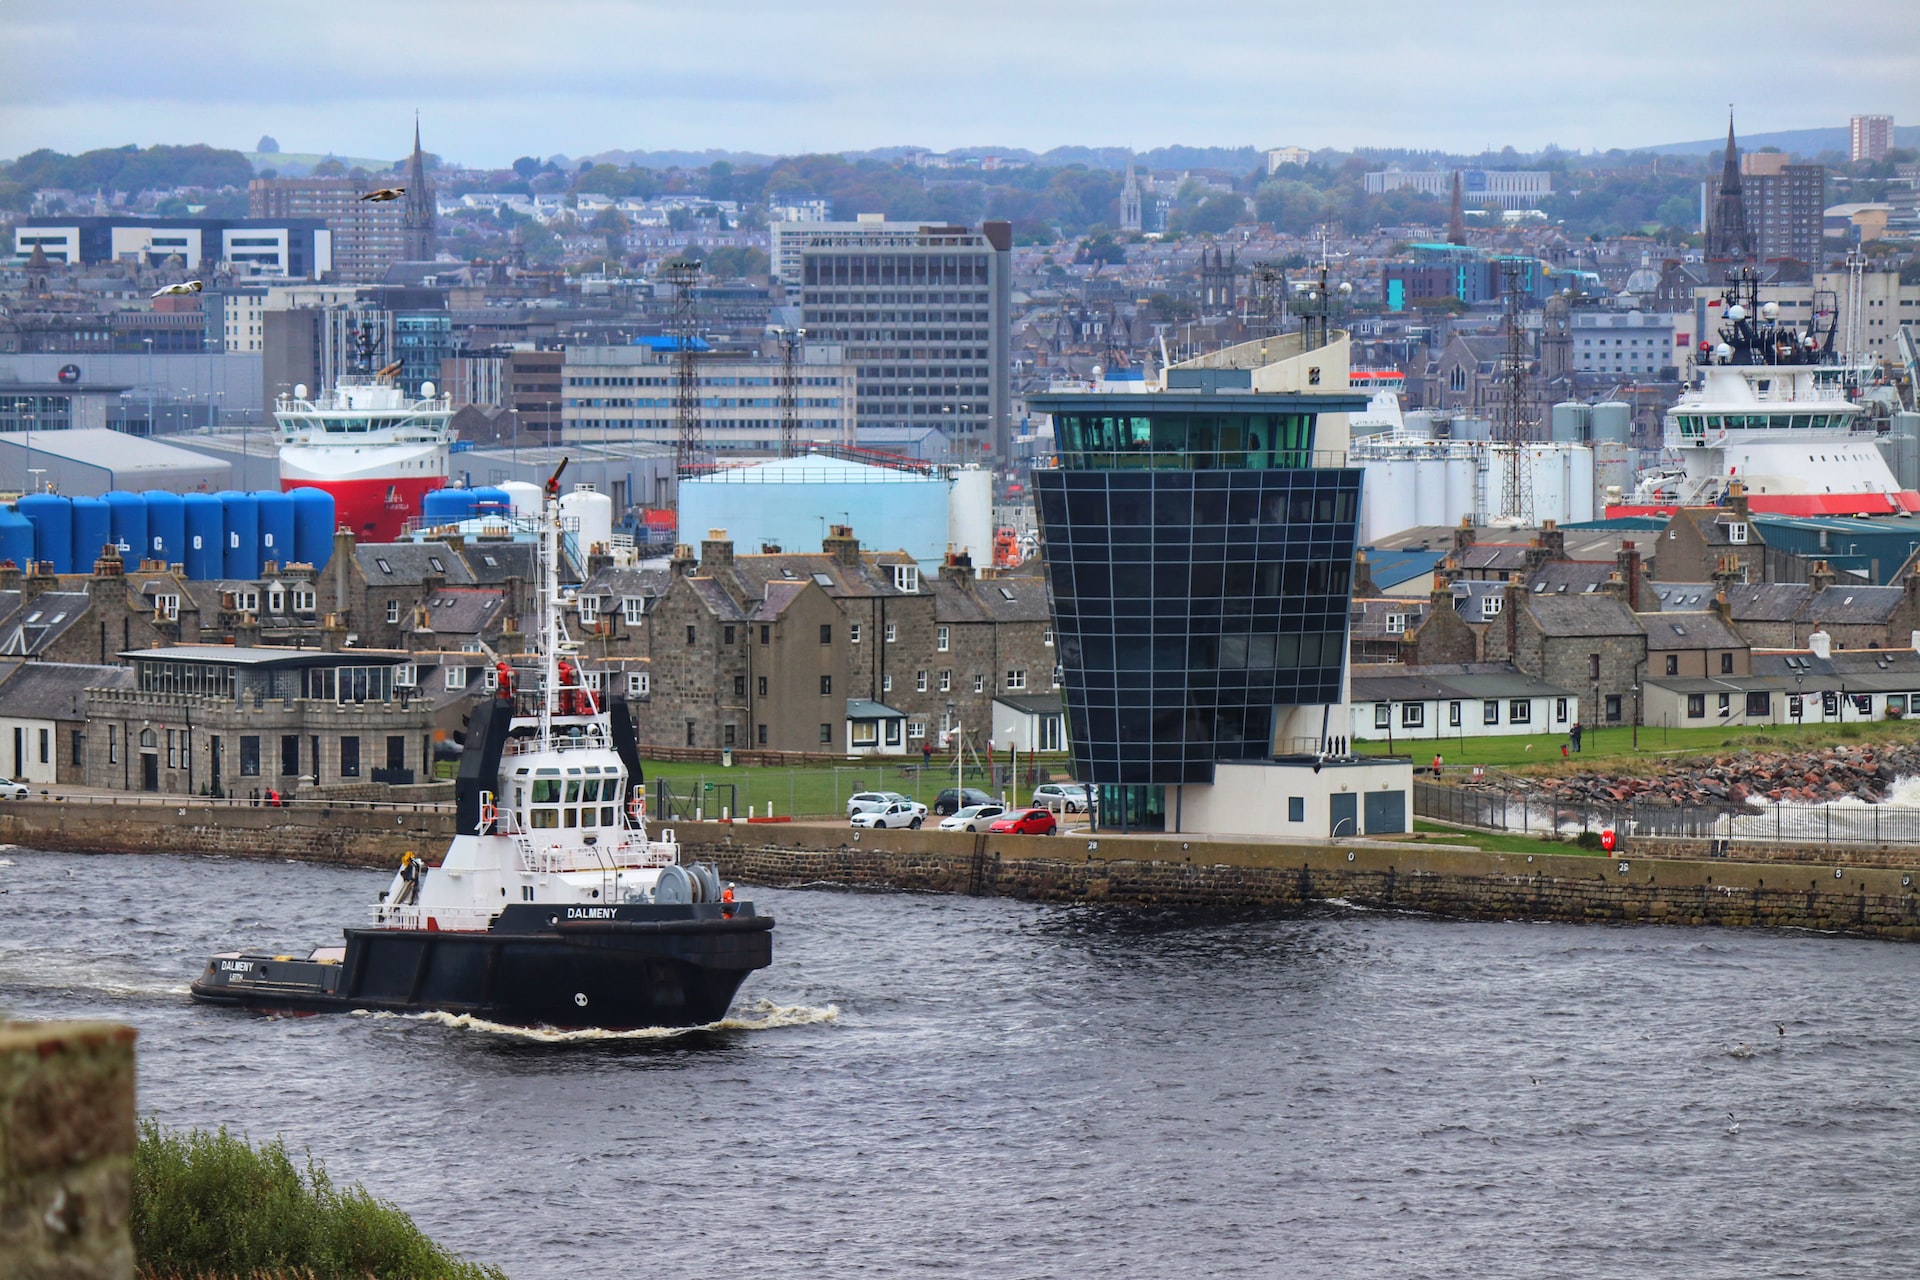 ASPC: Aberdeen's property values experience 0.6% drop in Q3